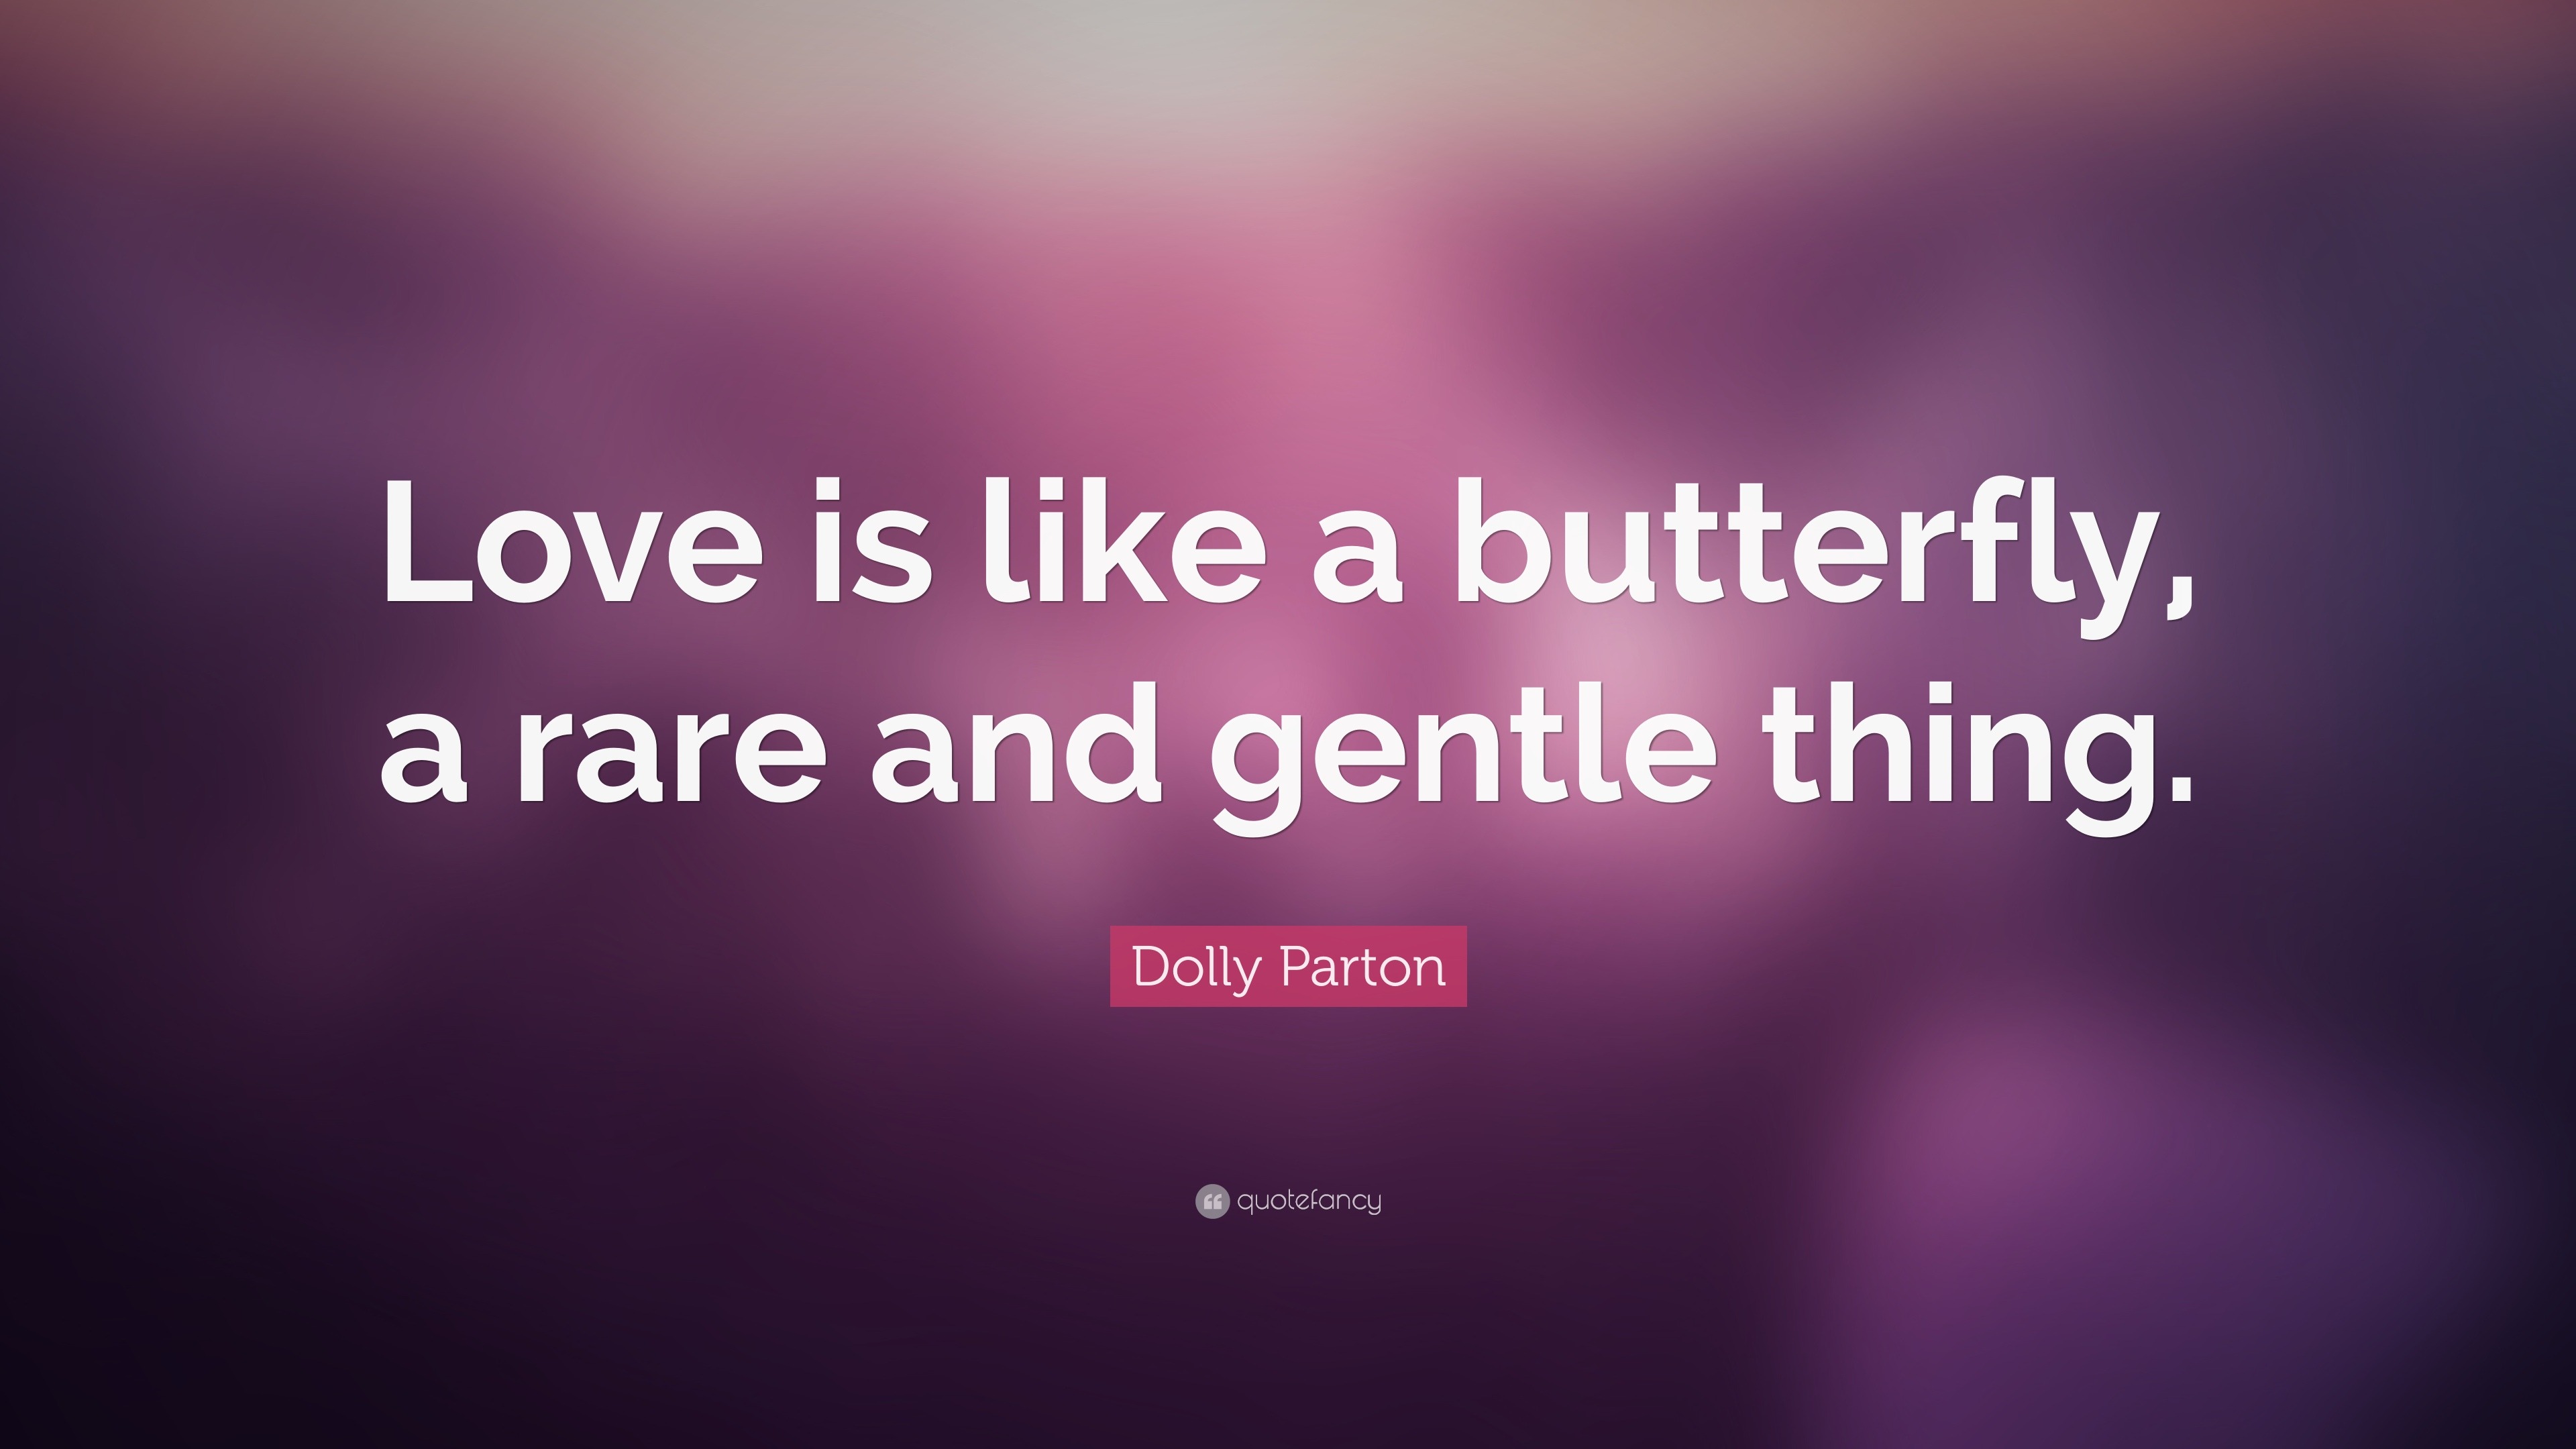 Dolly Parton Quote “Love is like a butterfly a rare and gentle thing